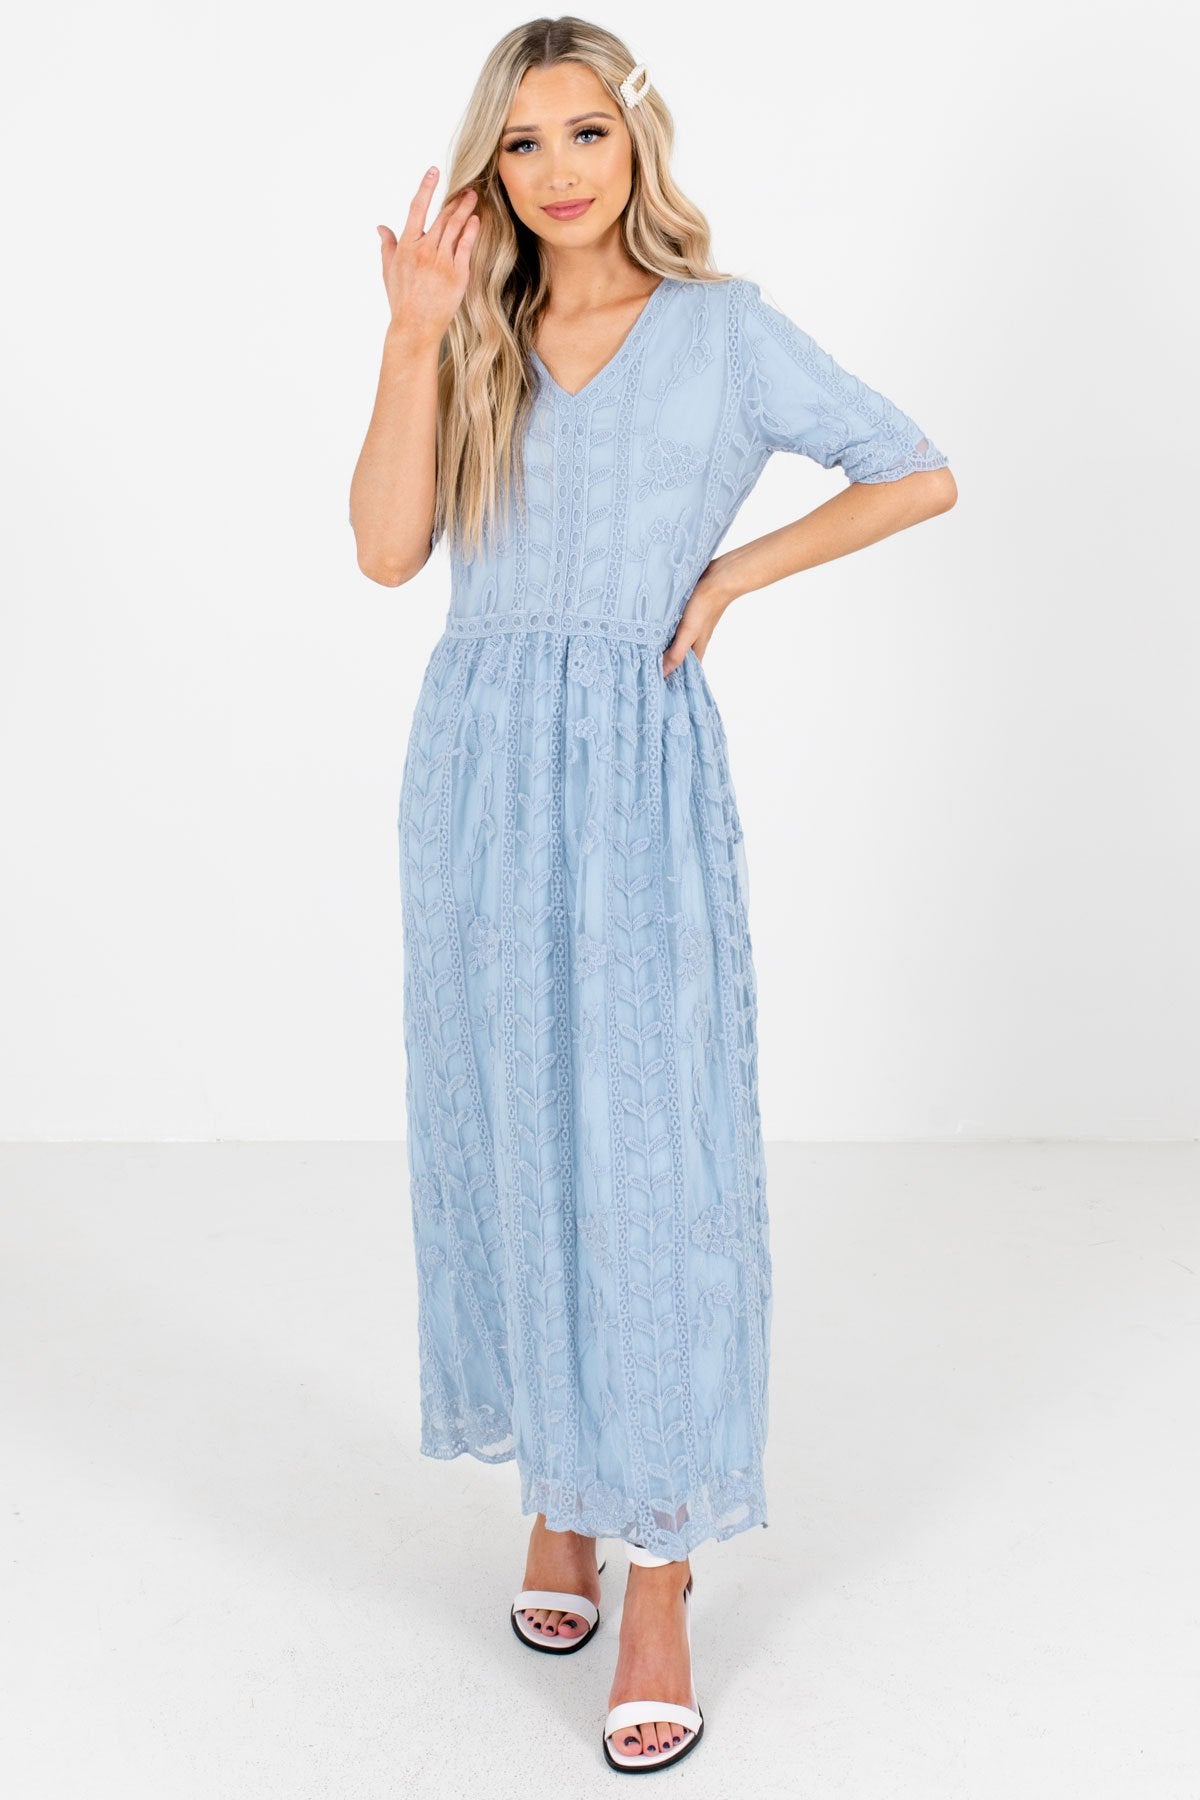 Blue Floral Lace Overlay Boutique Maxi Dresses for Women